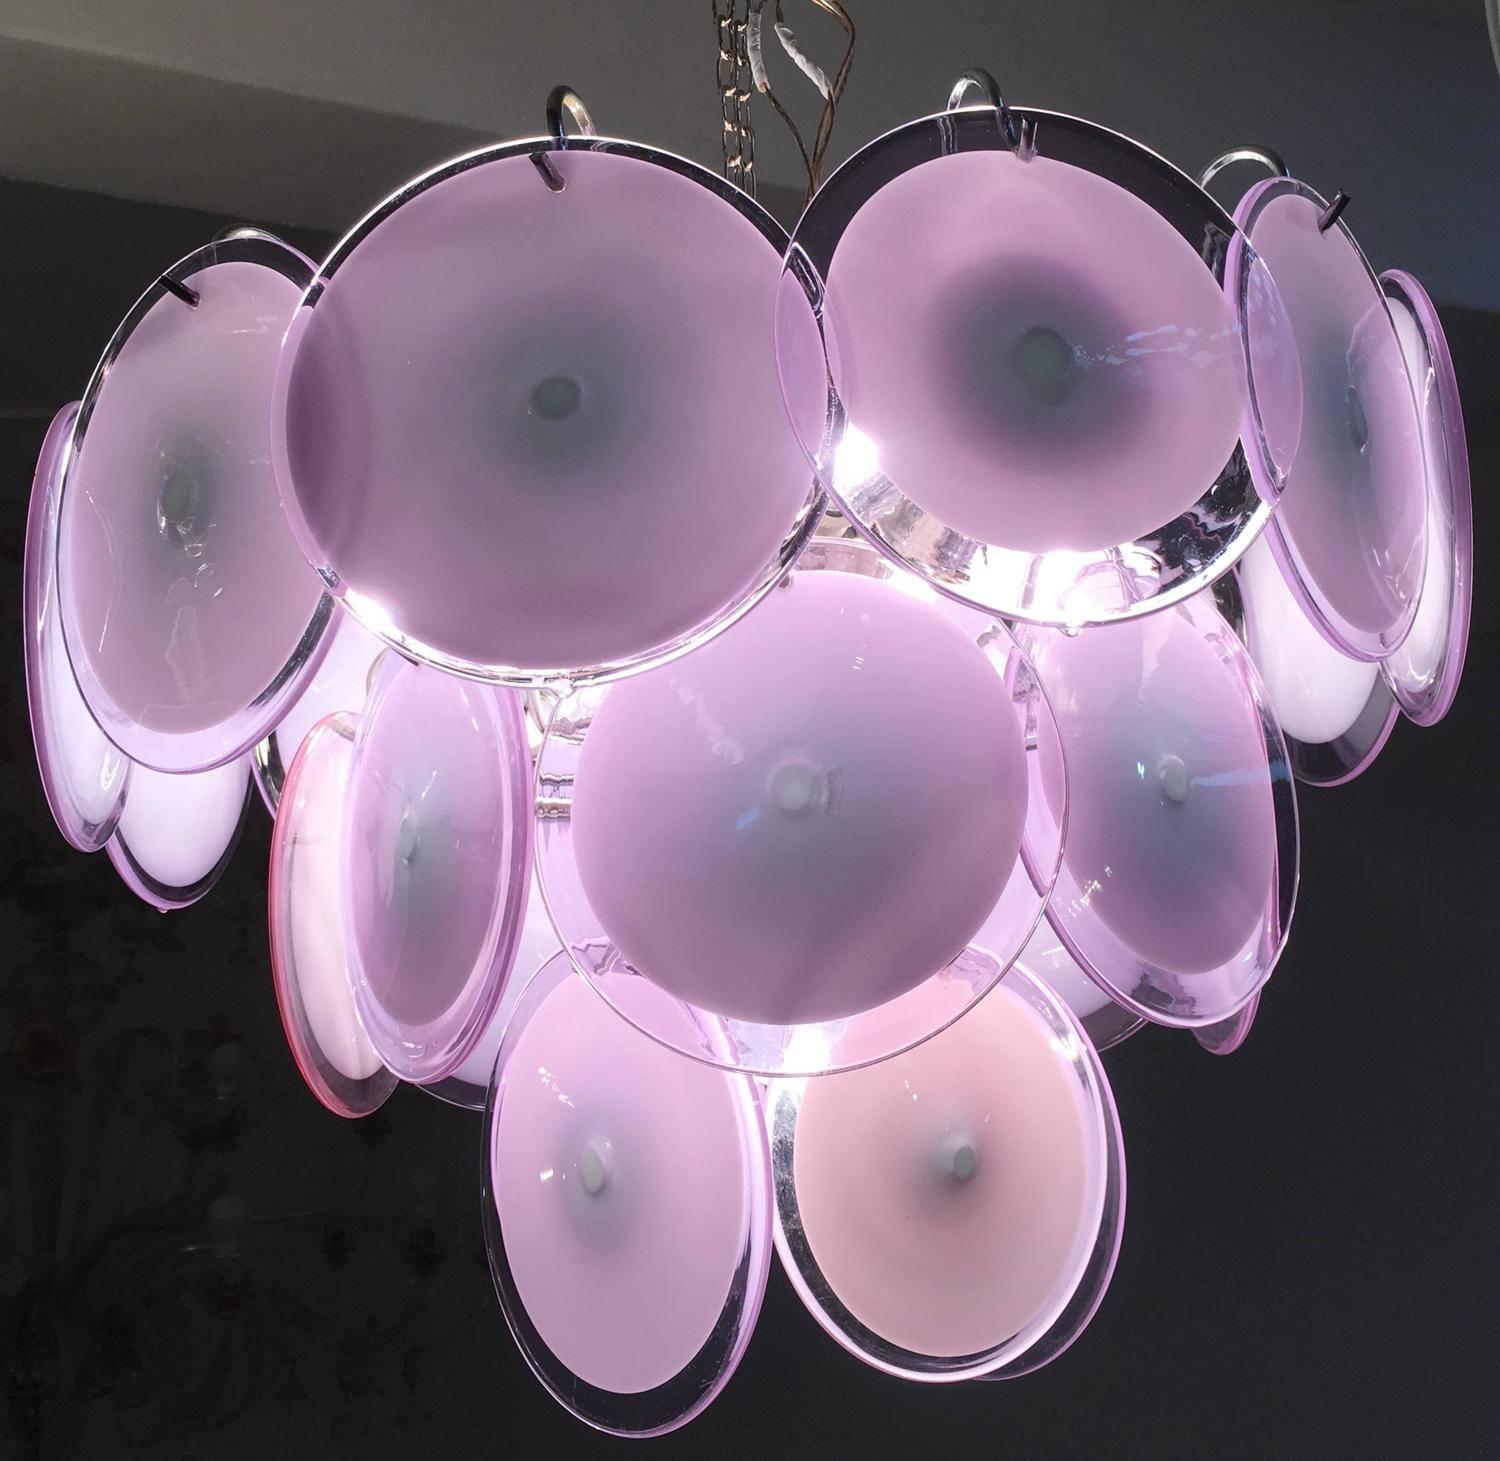 24 Murano discs for each chandelier mounted on three levels: 12+8+4 amethyst glass handblown.